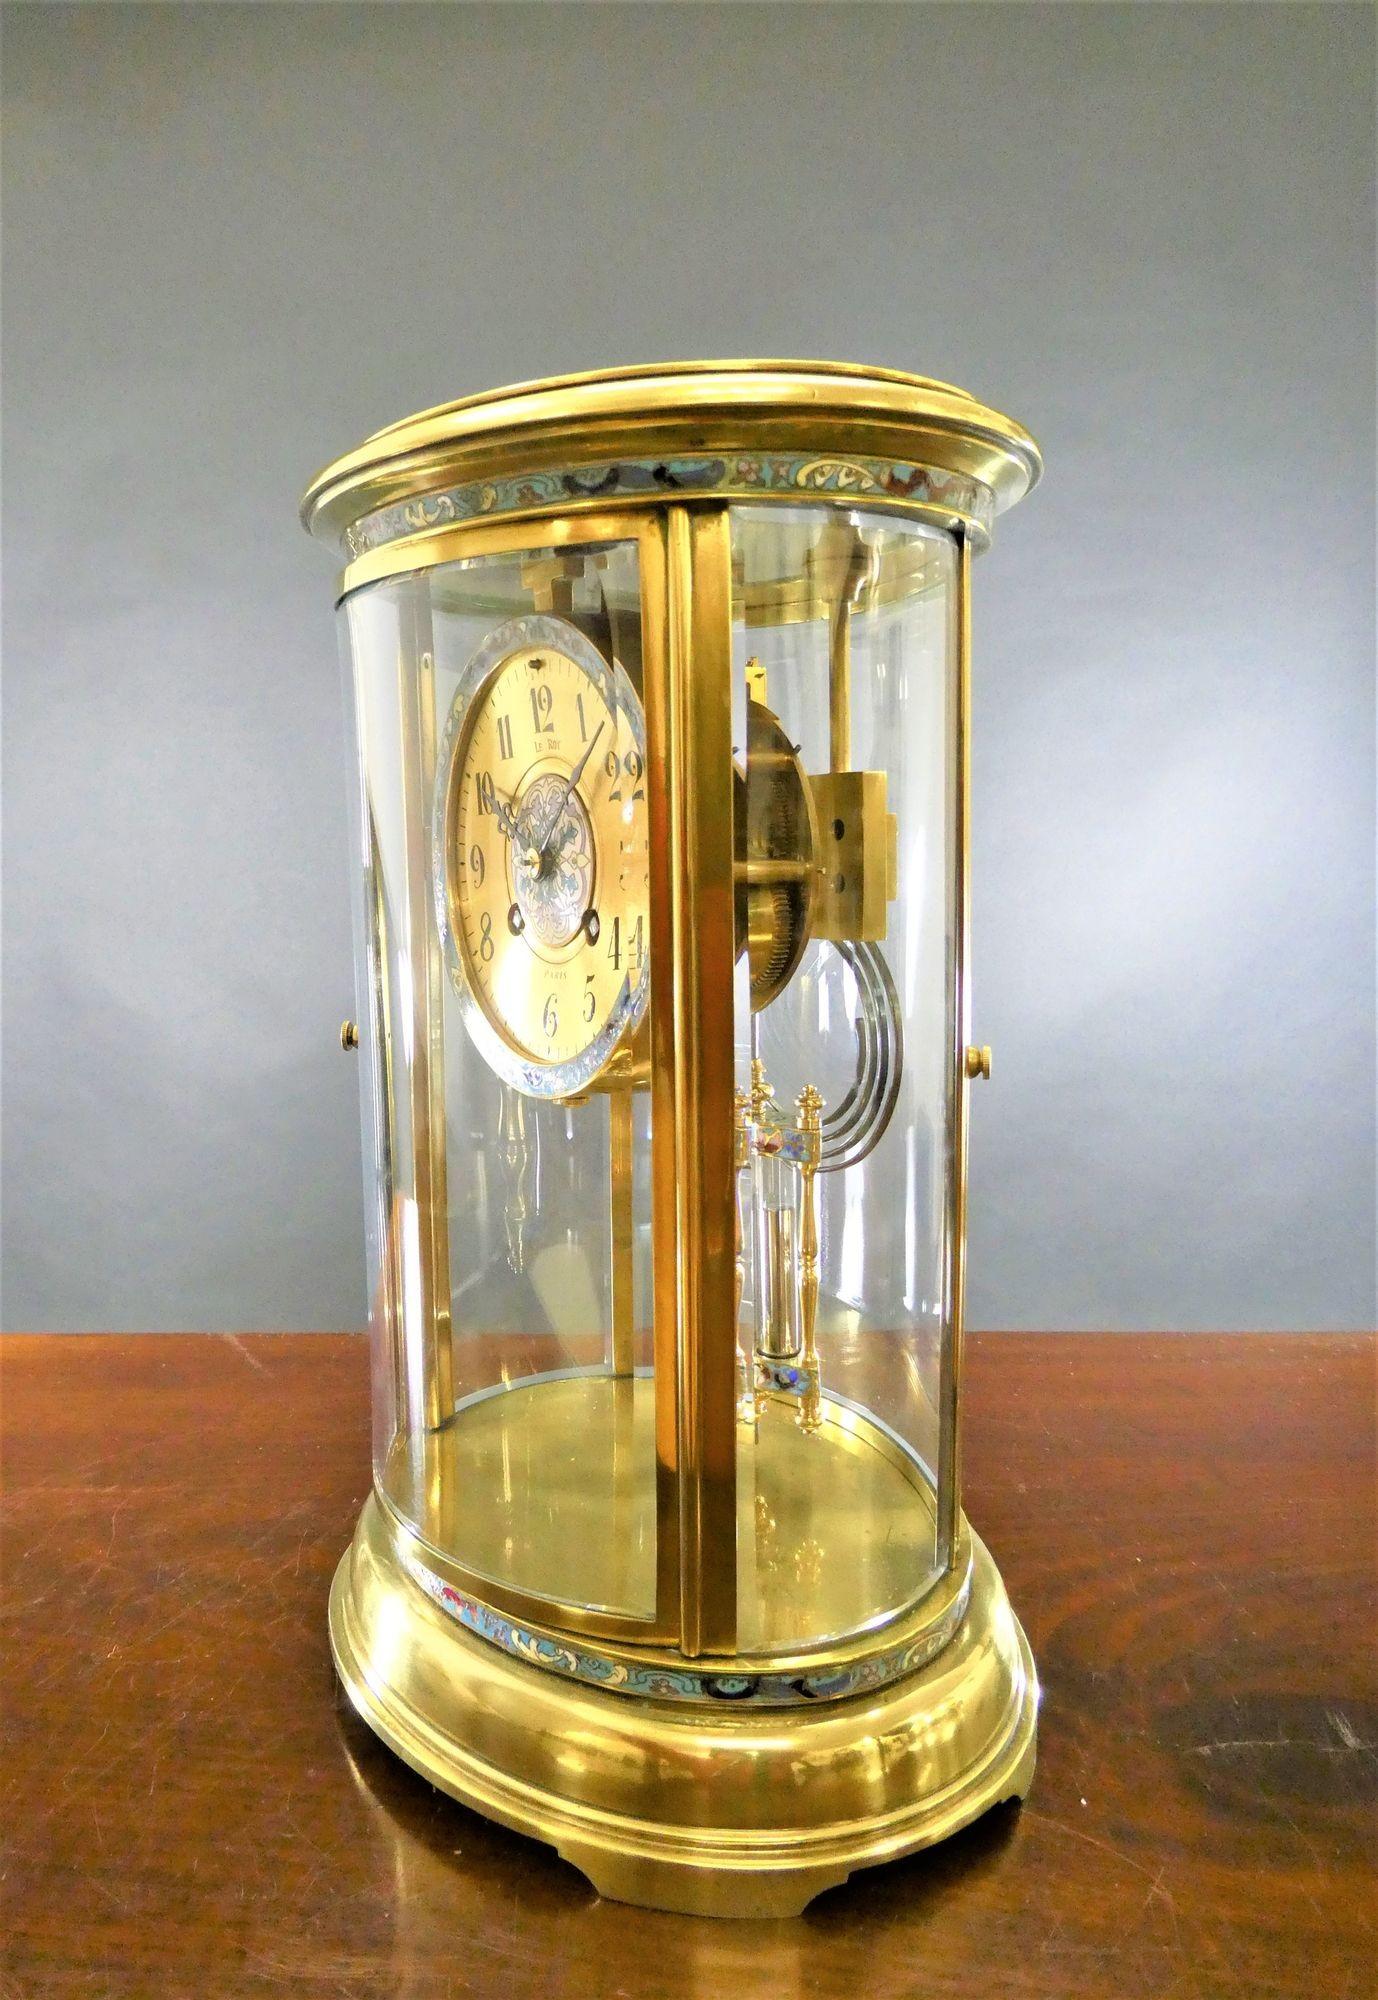 Late 19th Century French Oval Four Glass Mantel Clock with Champleve Decoration, Le Roy, Paris For Sale